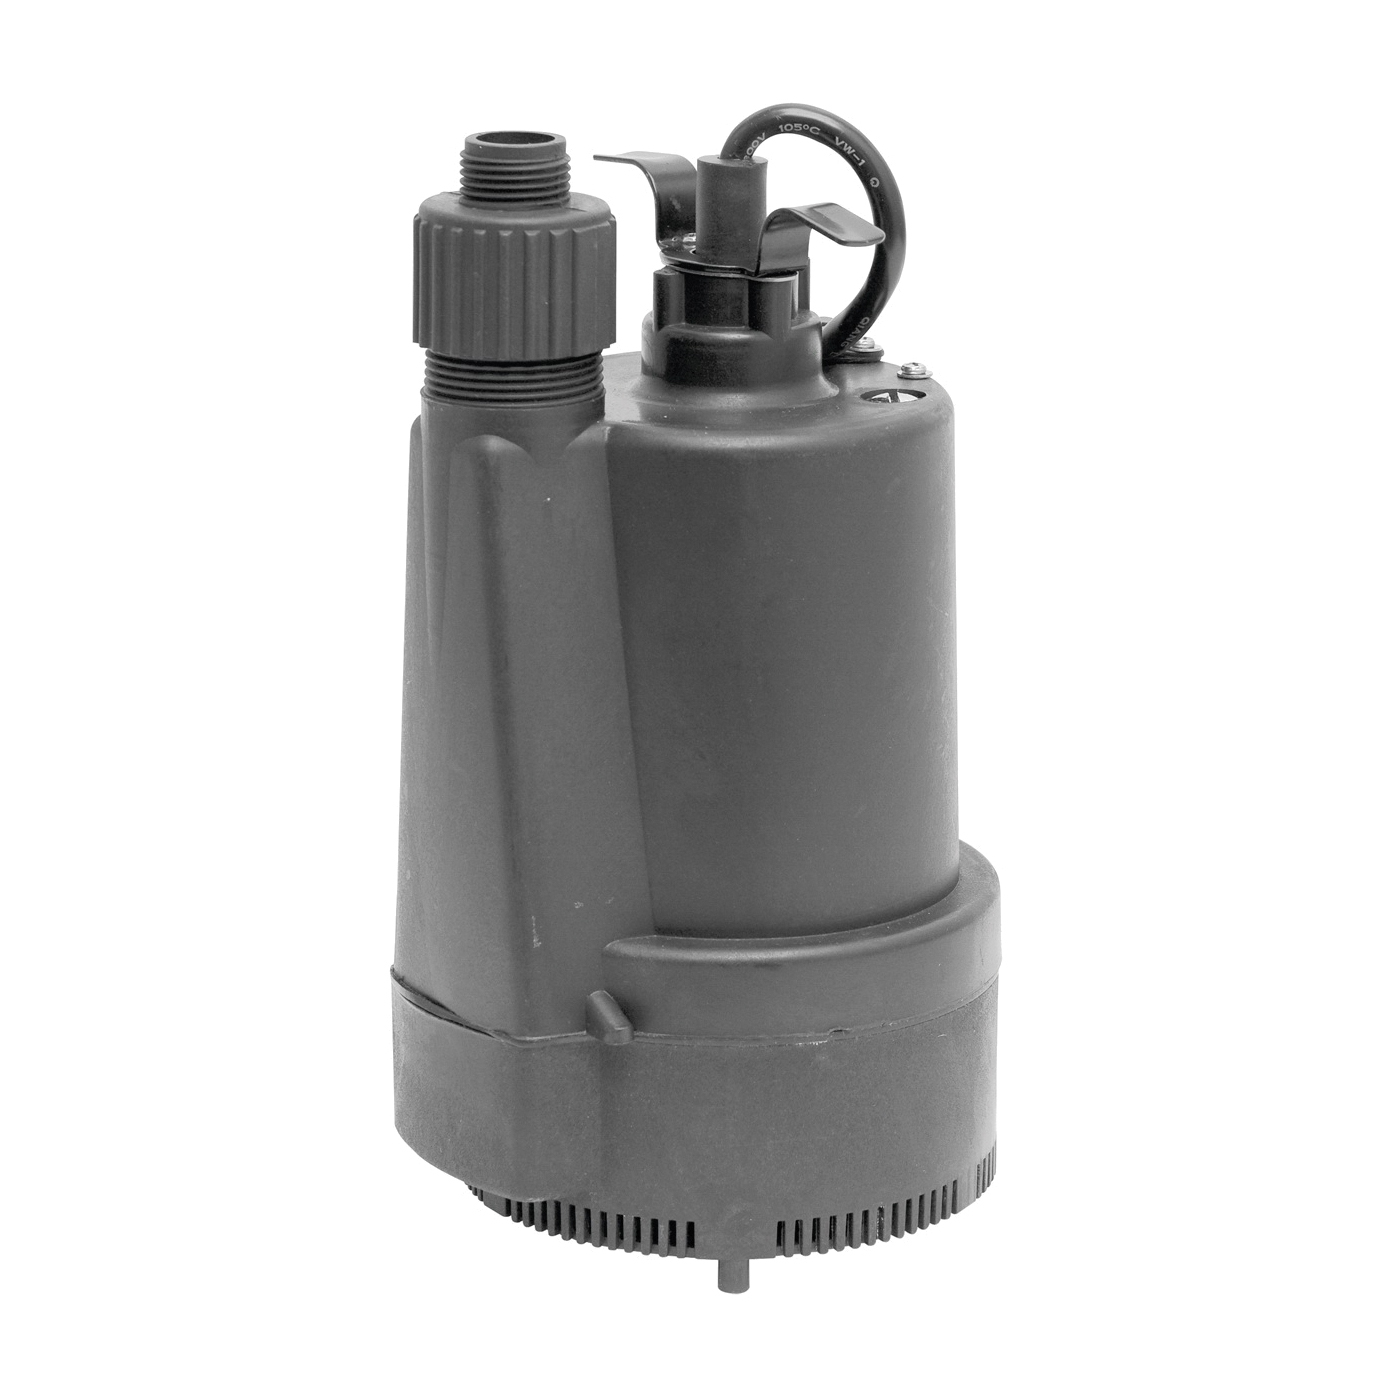 91330 Submersible Utility Pump, 4.1 A, 120 V, 0.33 hp, 1-1/4 in Outlet, 40 gpm, Thermoplastic Impeller